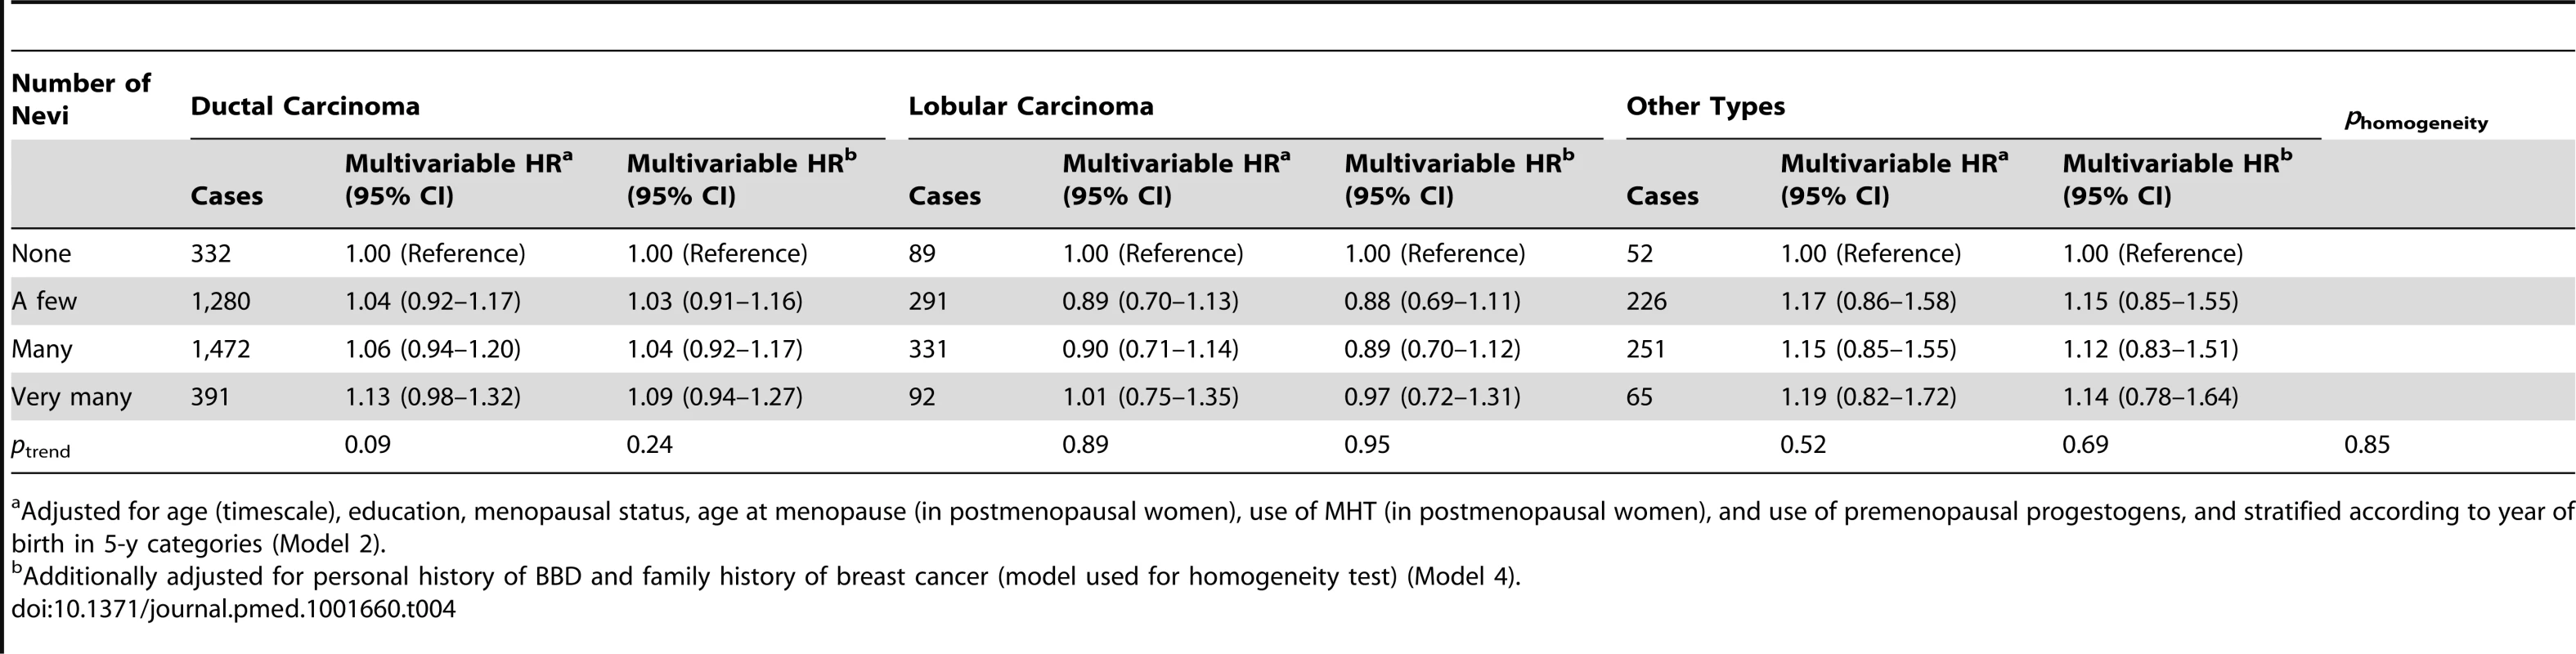 Hazard ratios and 95% confidence intervals for risk of breast cancer in relation to number of nevi, stratified by histological type of breast cancer, E3N cohort (<i>n</i> = 89,429).